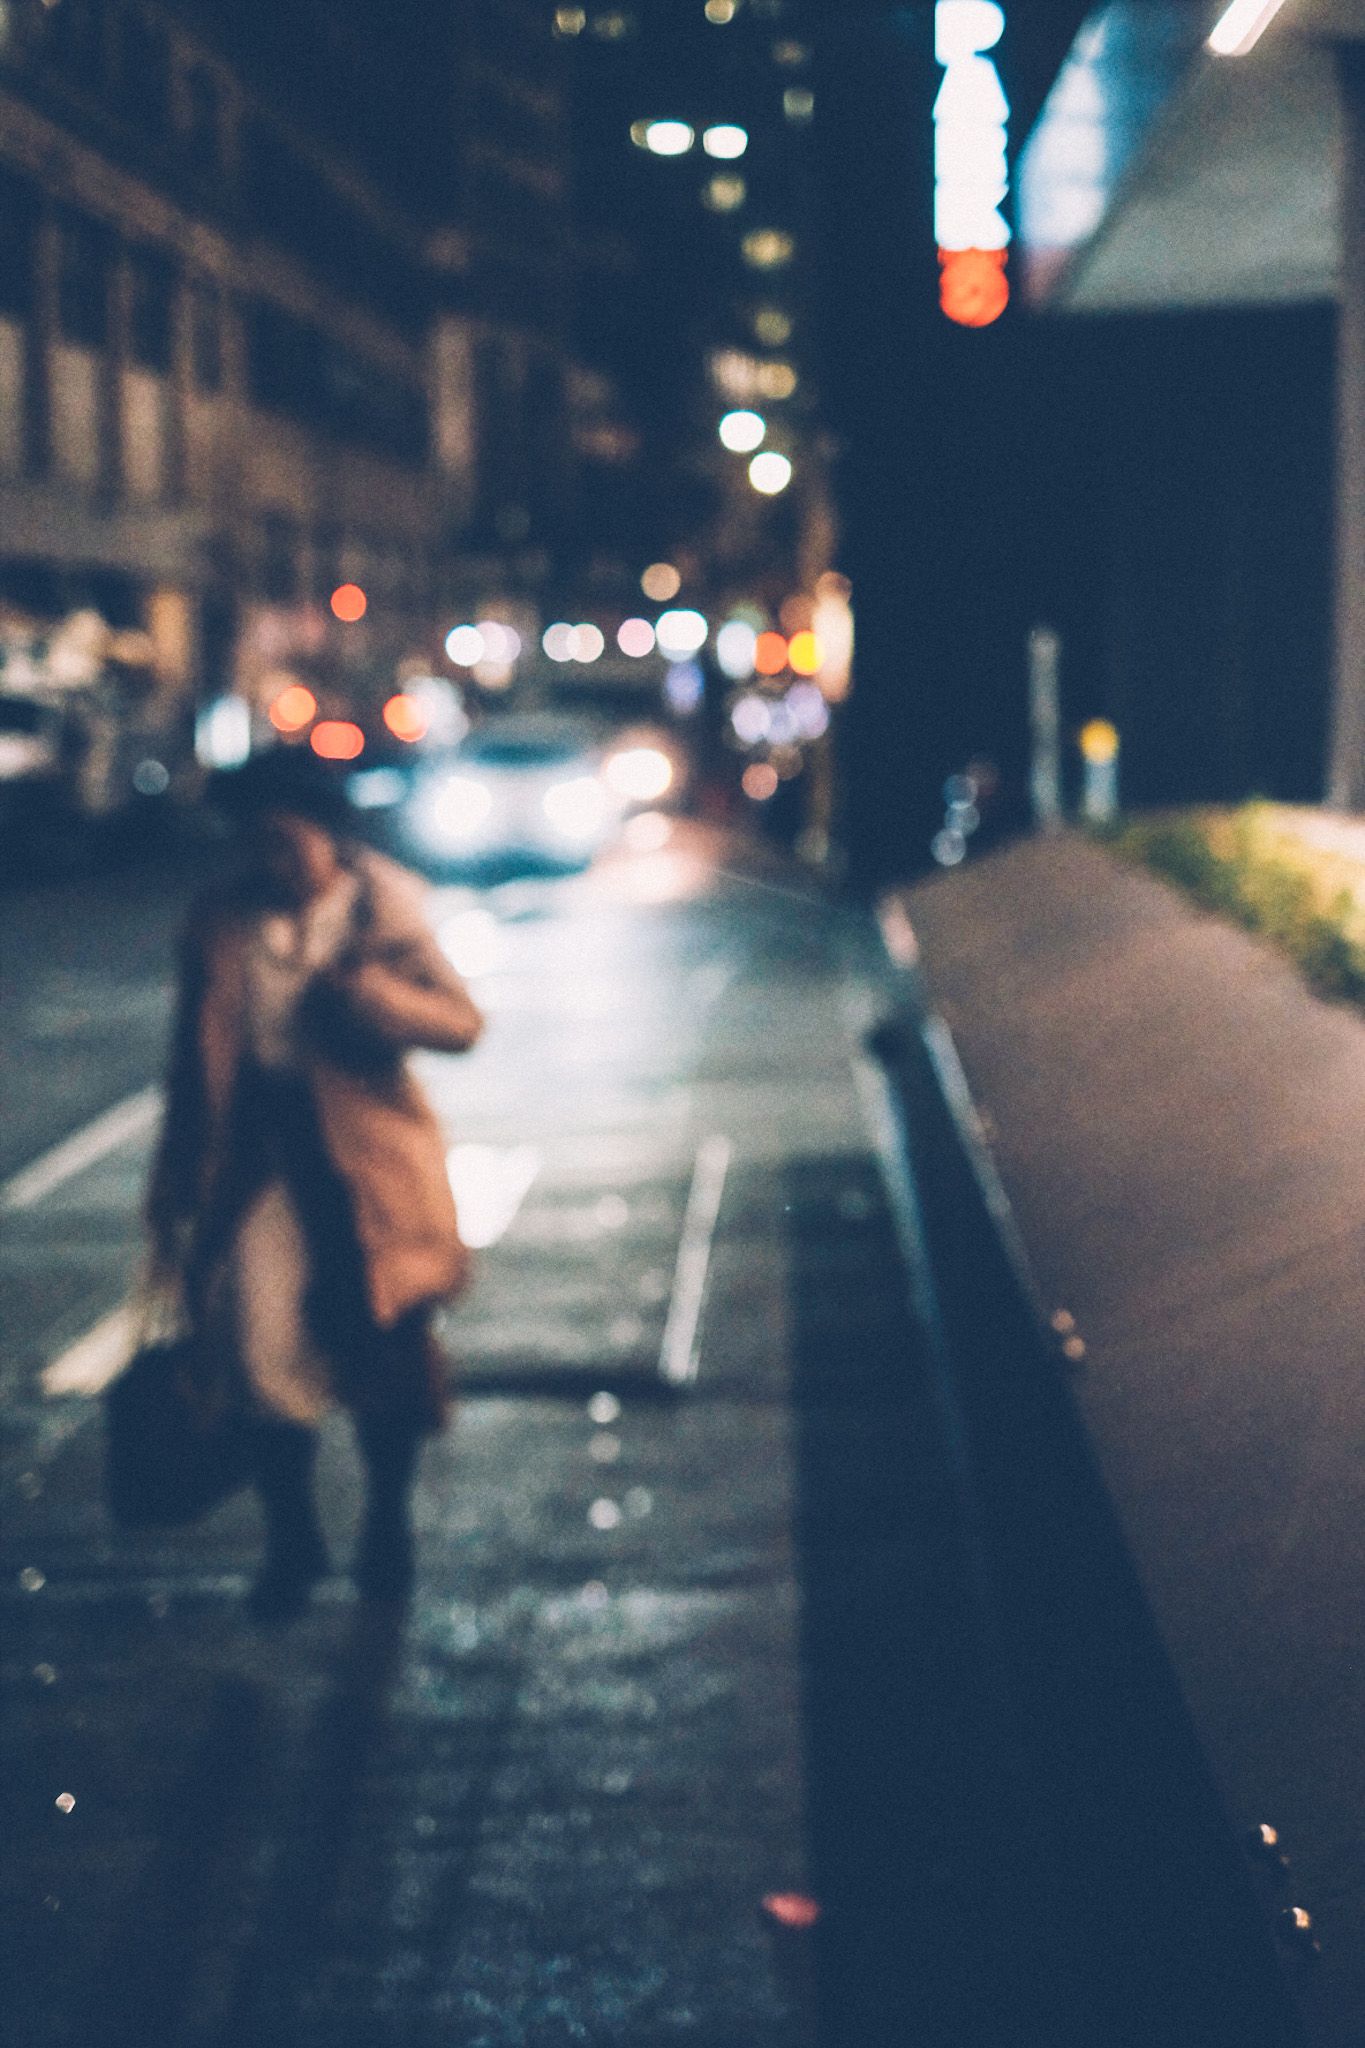 Out of focus, a woman runs down a city street at night, car and building lights illuminating the background.